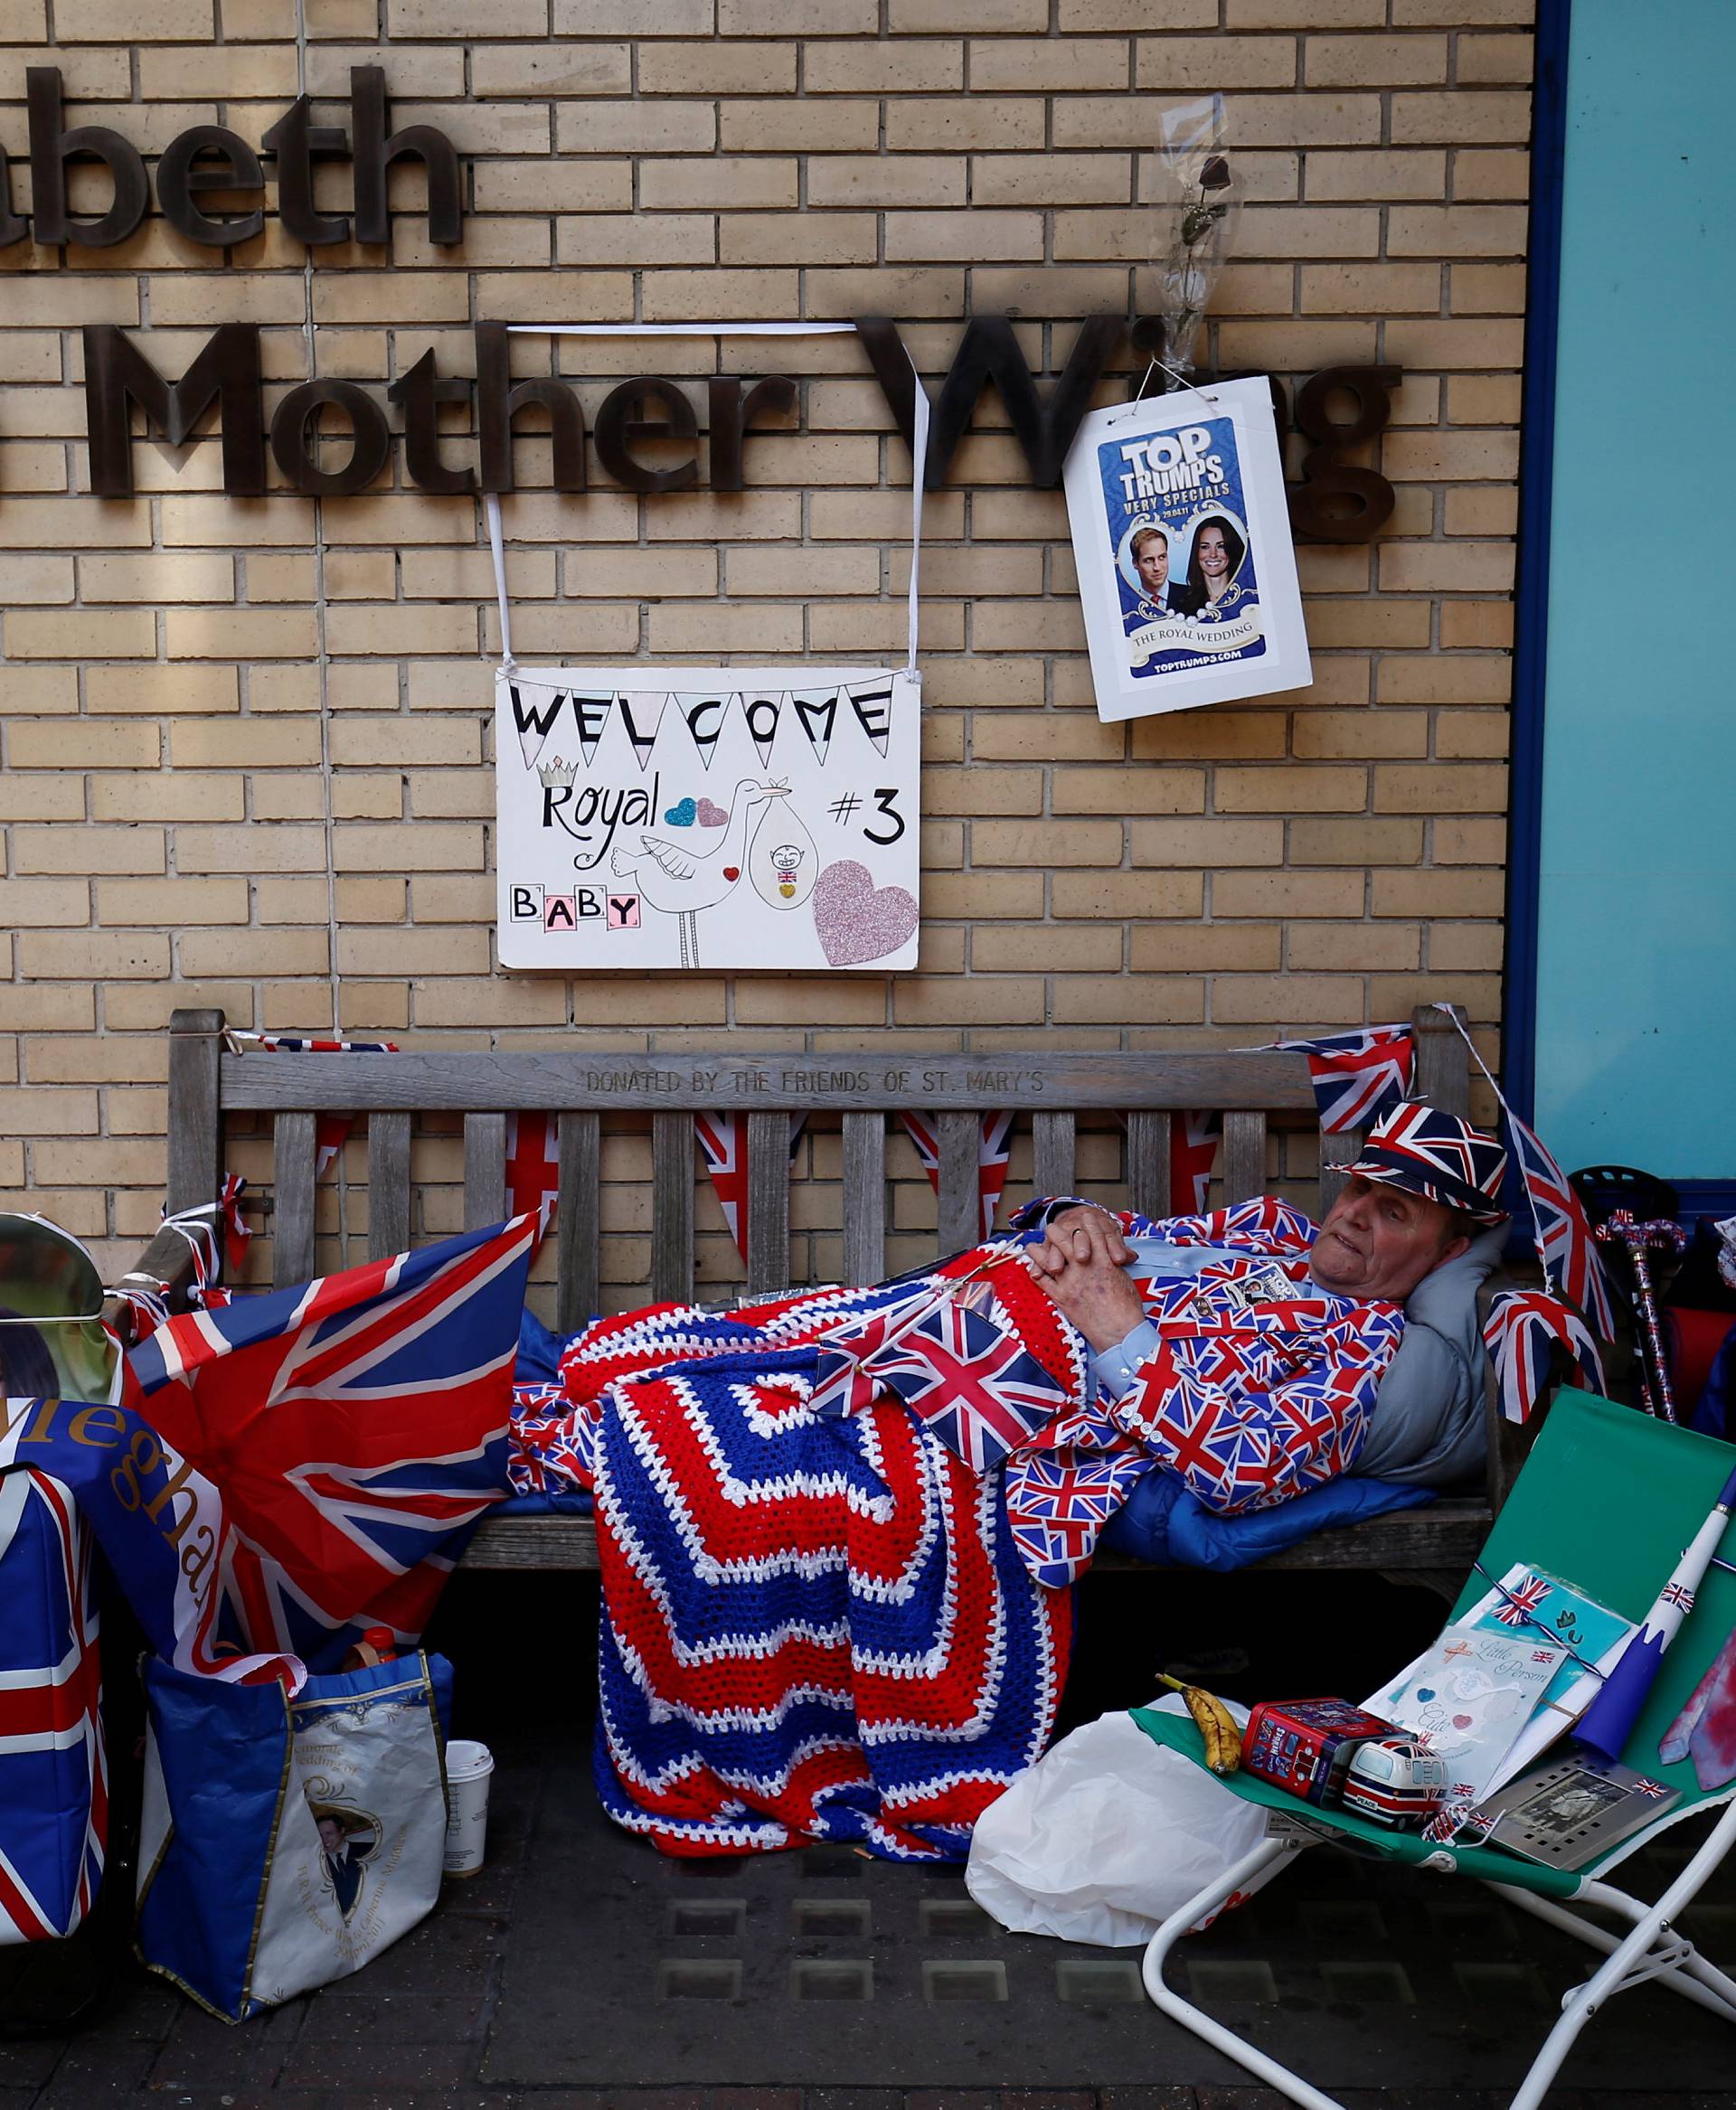 A fan of Britain's royal family camps outside the hospital where Catherine, Duchess of Cambridge is due to give birth, in London